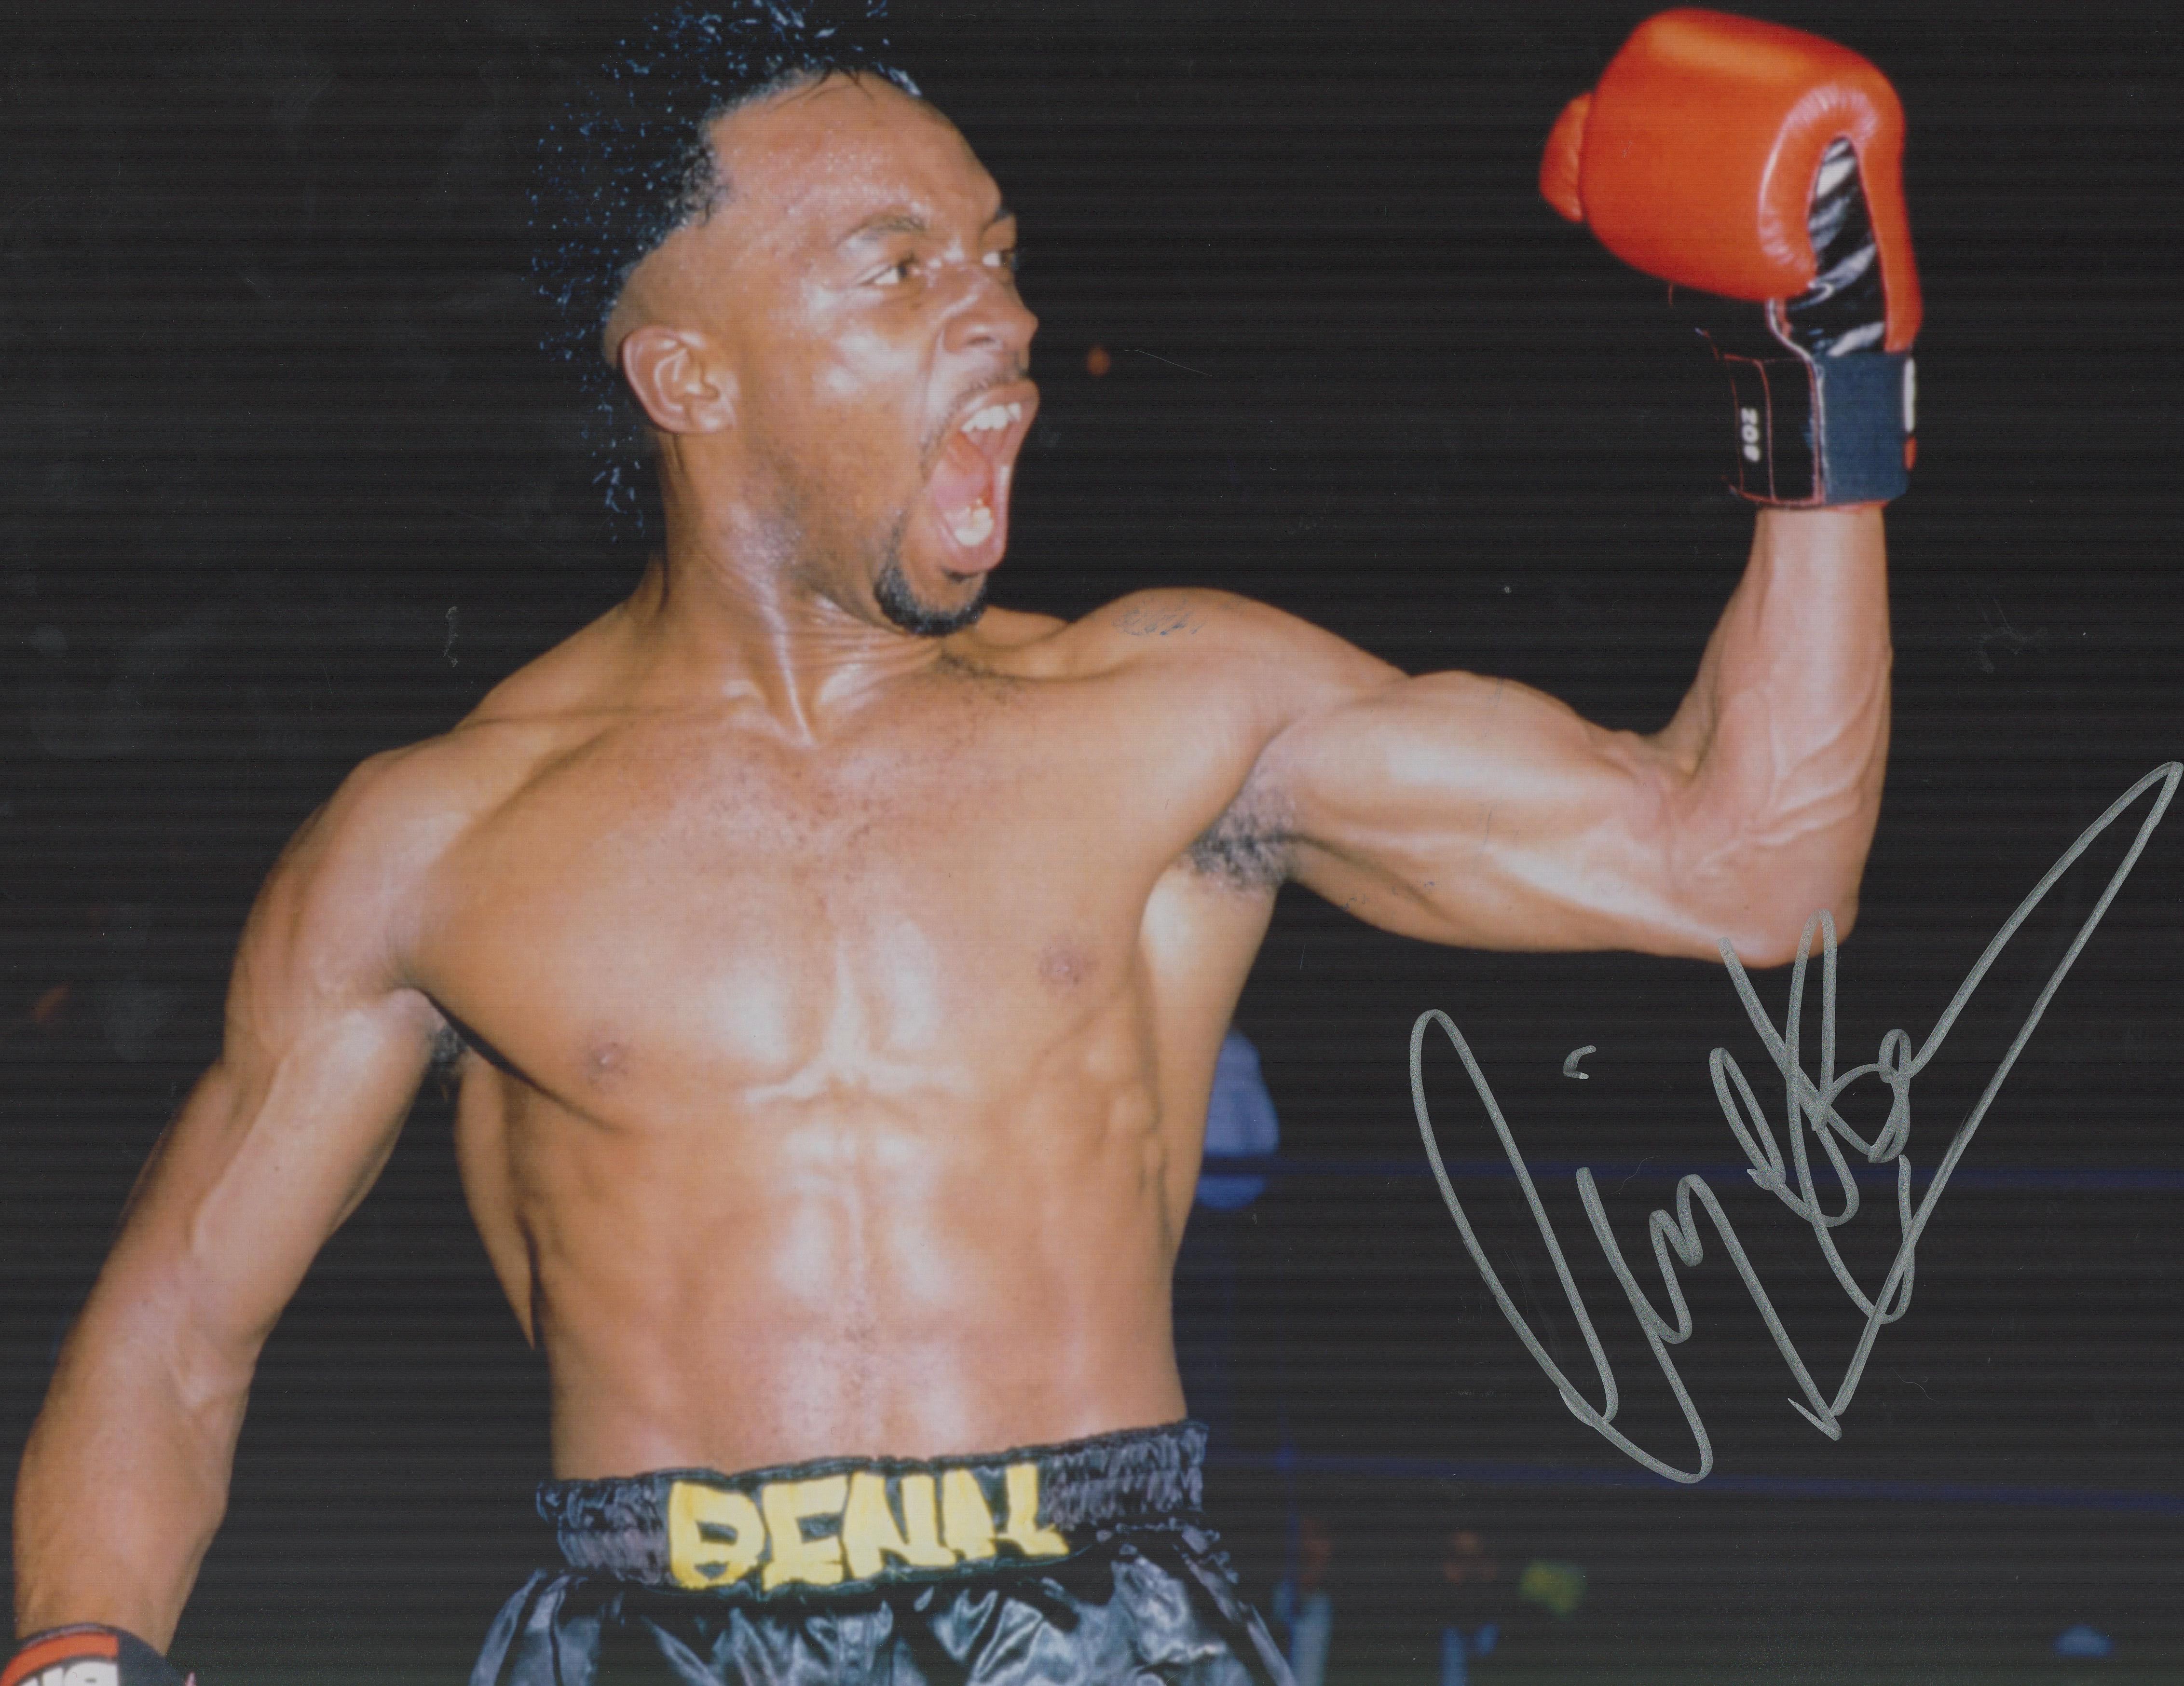 Boxing Nigel Benn signed 16x12 colour photo. Good condition. All autographs come with a